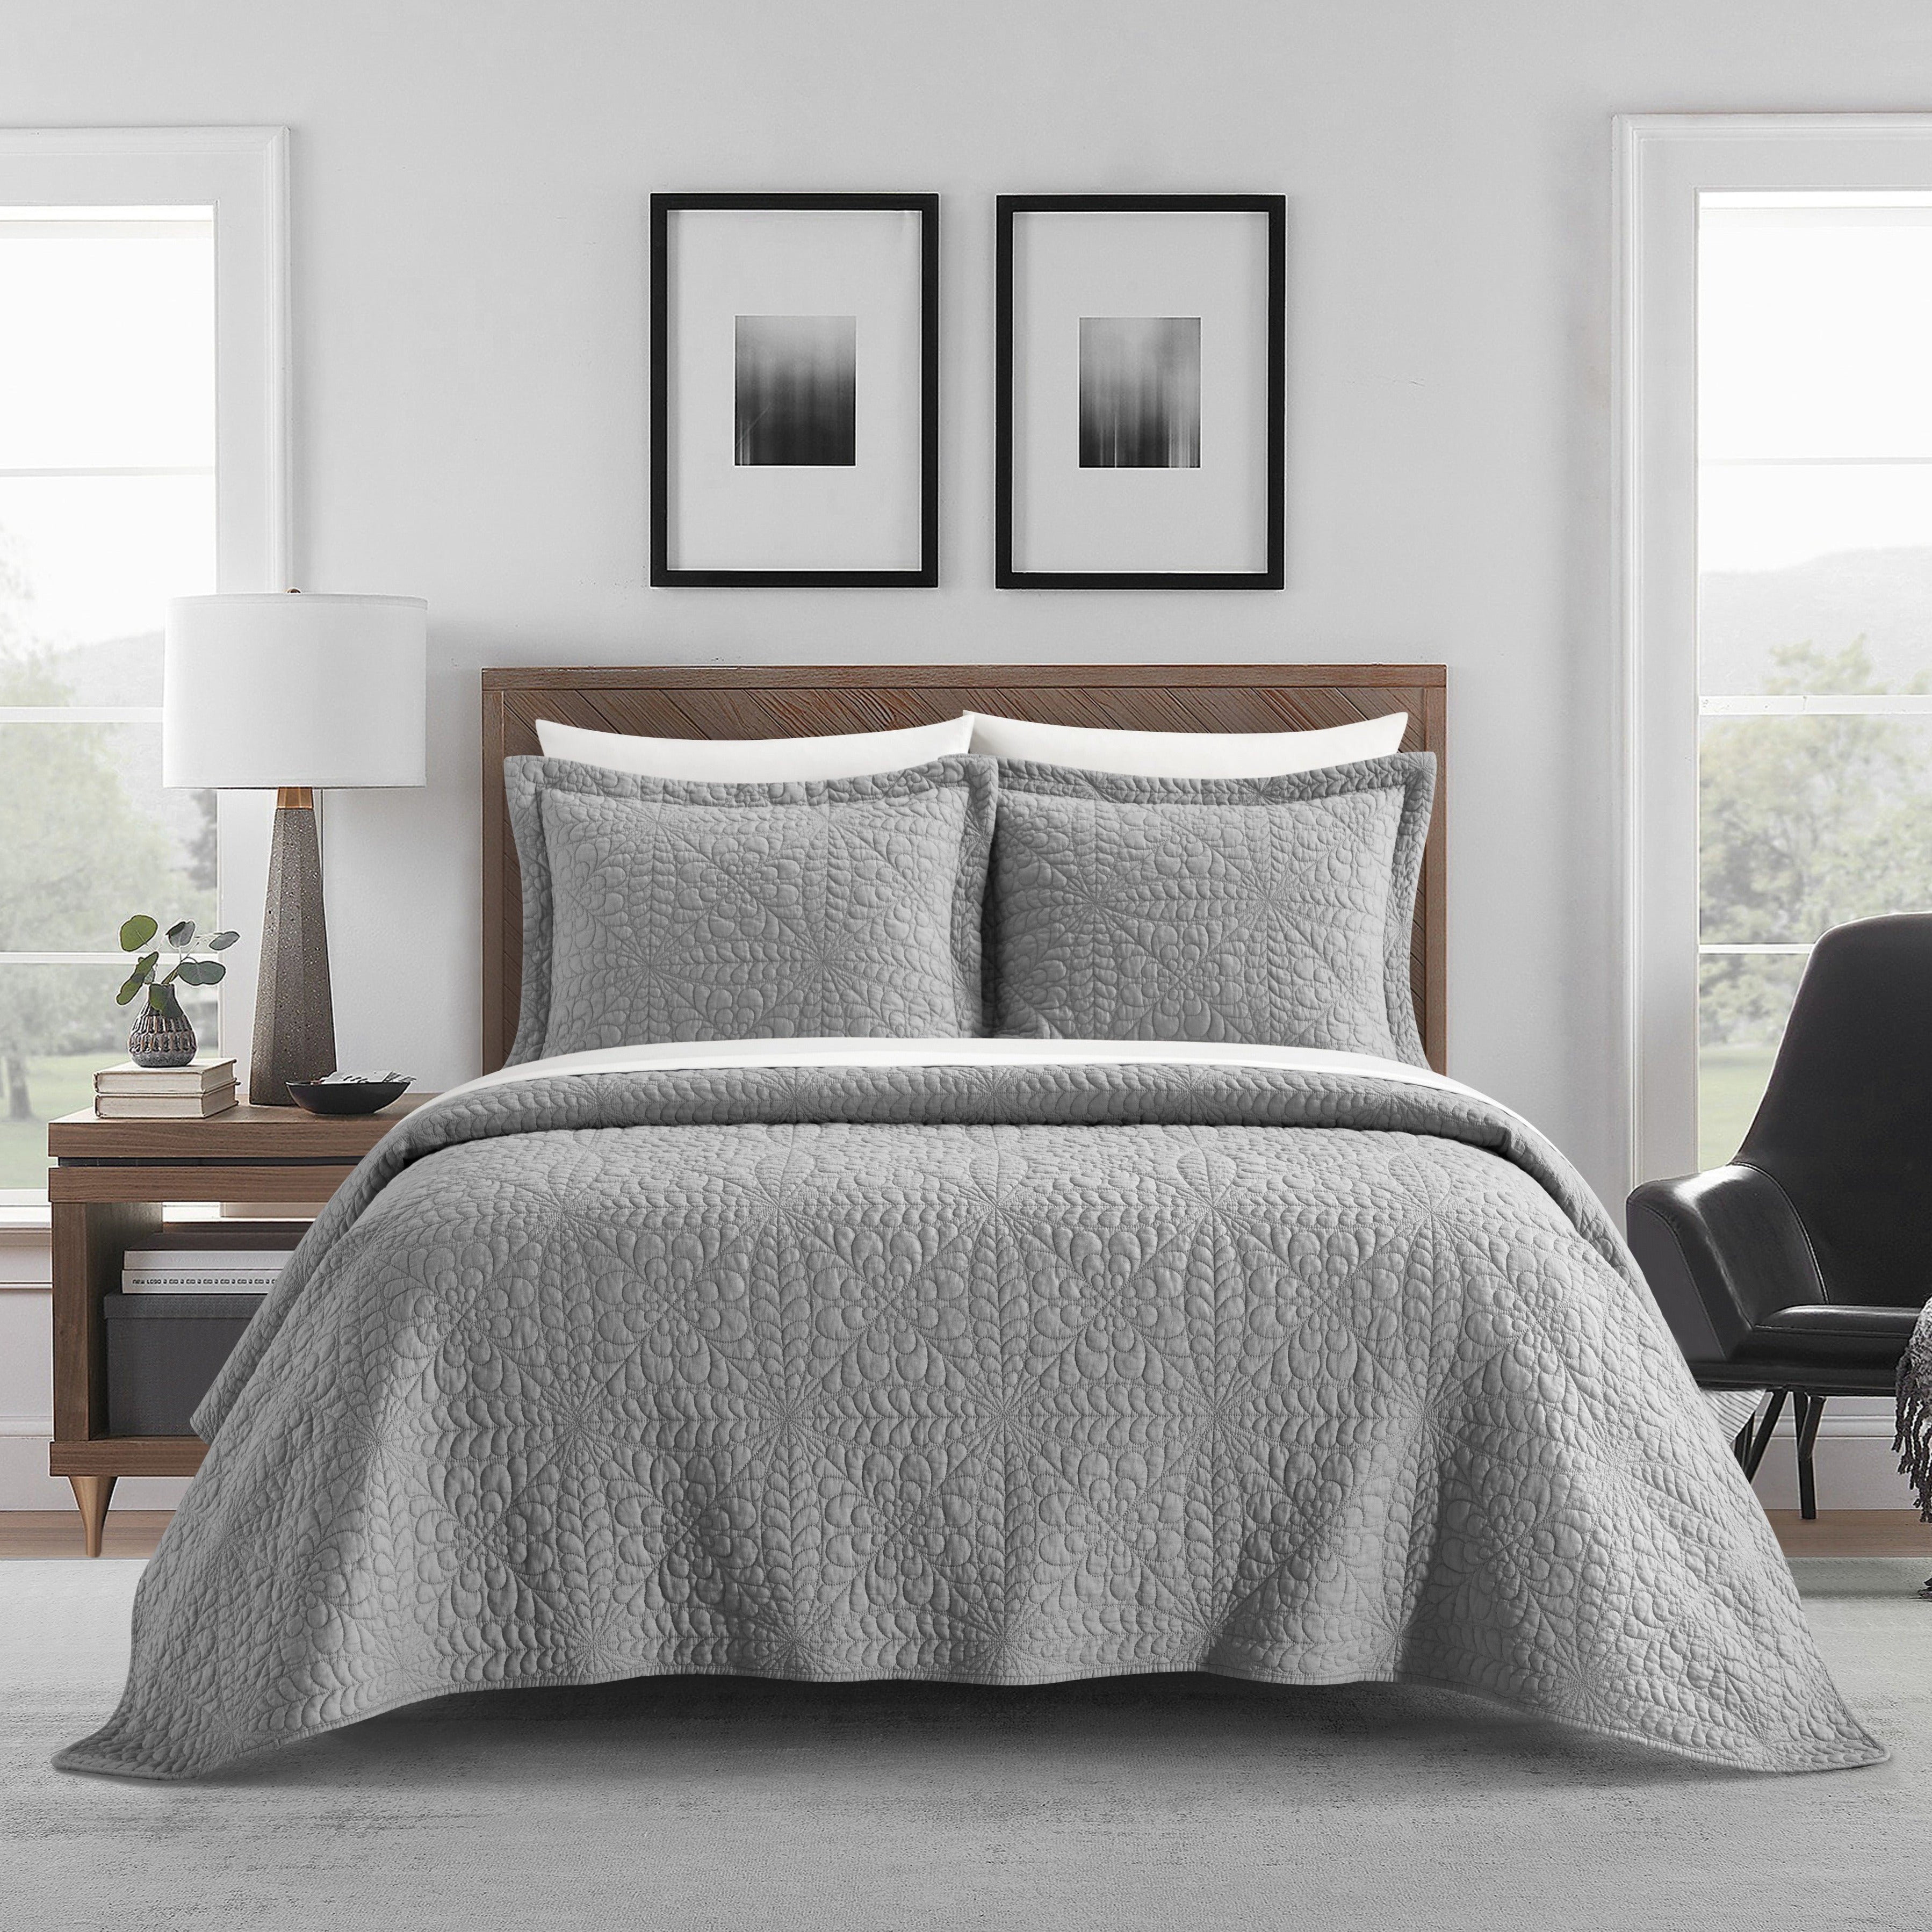 NY&C Home Babe 3 Piece Cotton Quilt Set Grey